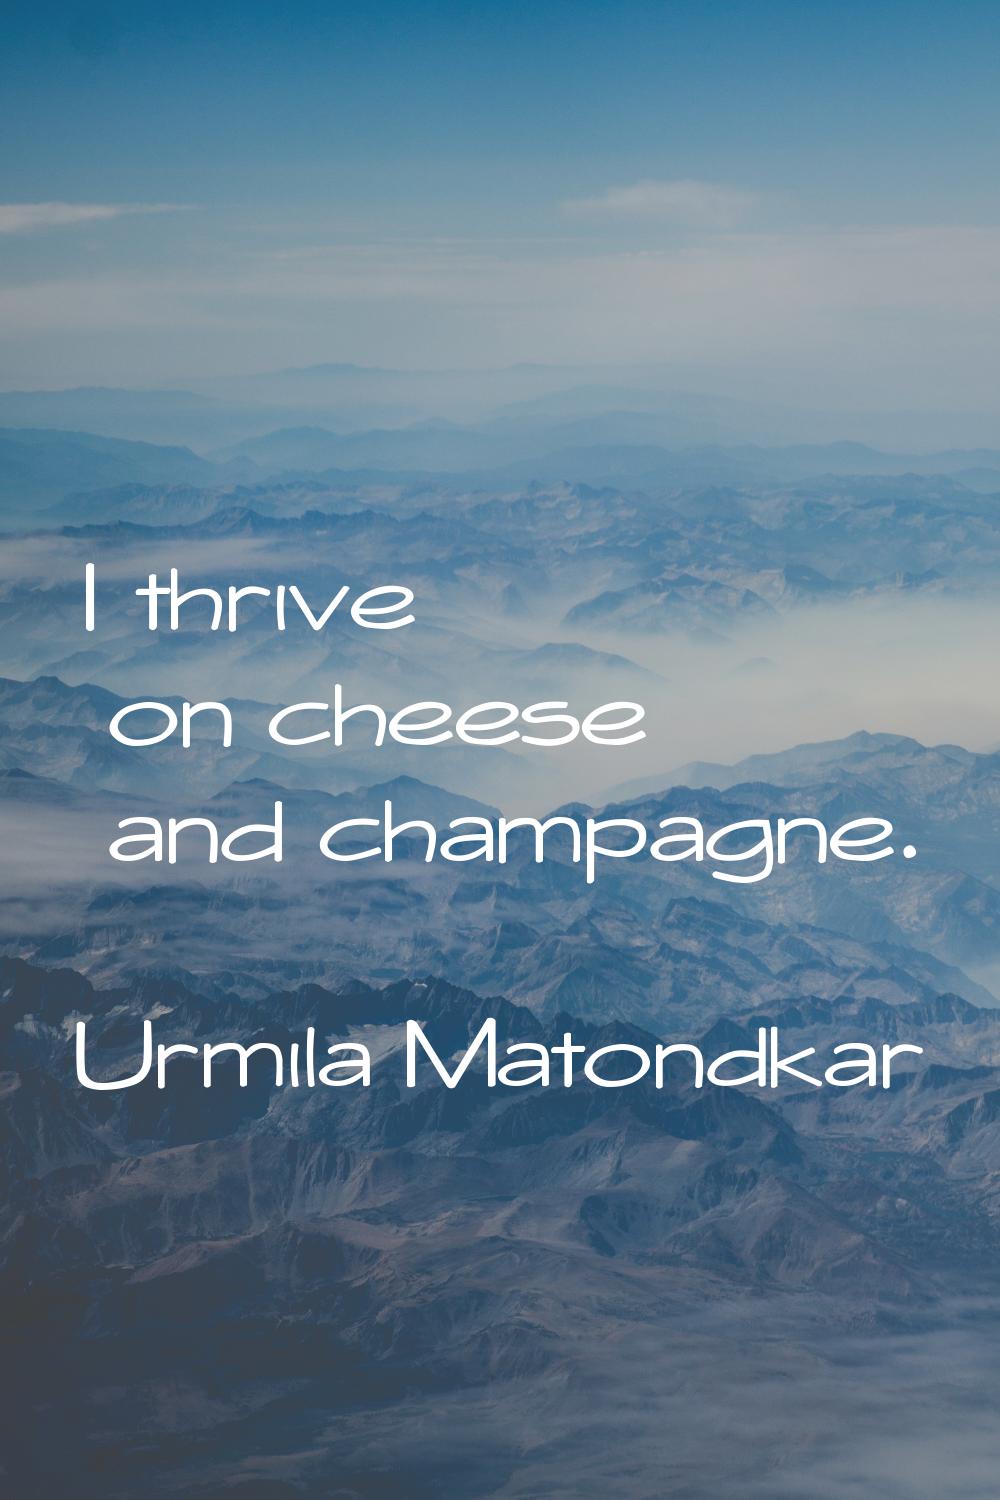 I thrive on cheese and champagne.